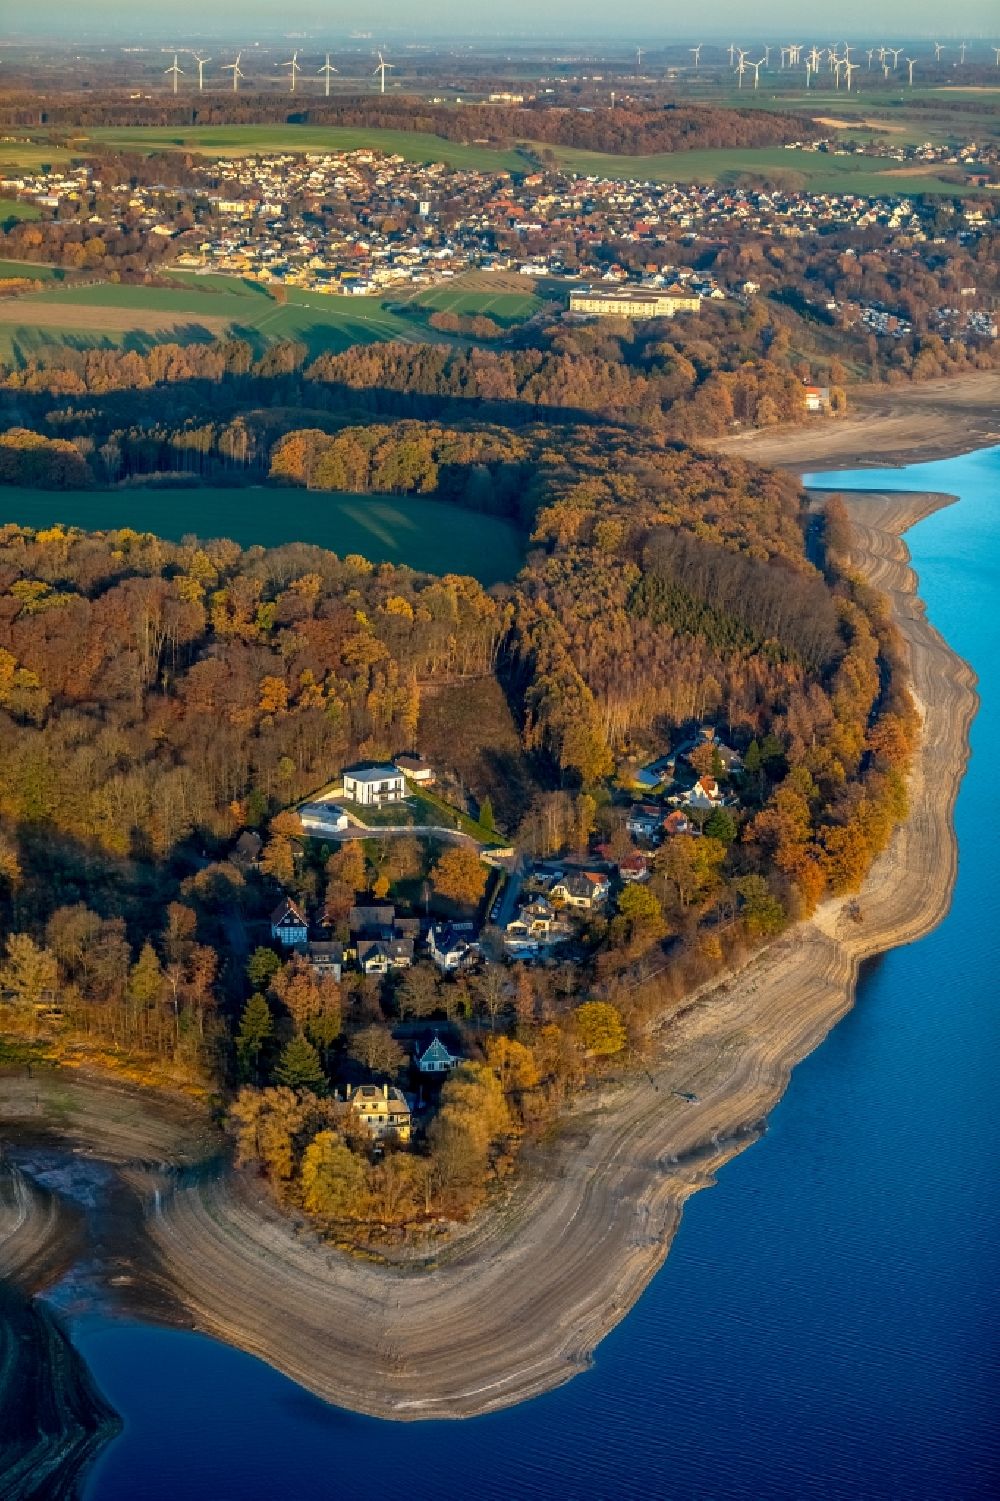 Möhnesee from the bird's eye view: Low water level and lack of water caused the shoreline areas to be exposed of Stausees on Moehnetalsperre in Moehnesee in the state North Rhine-Westphalia, Germany